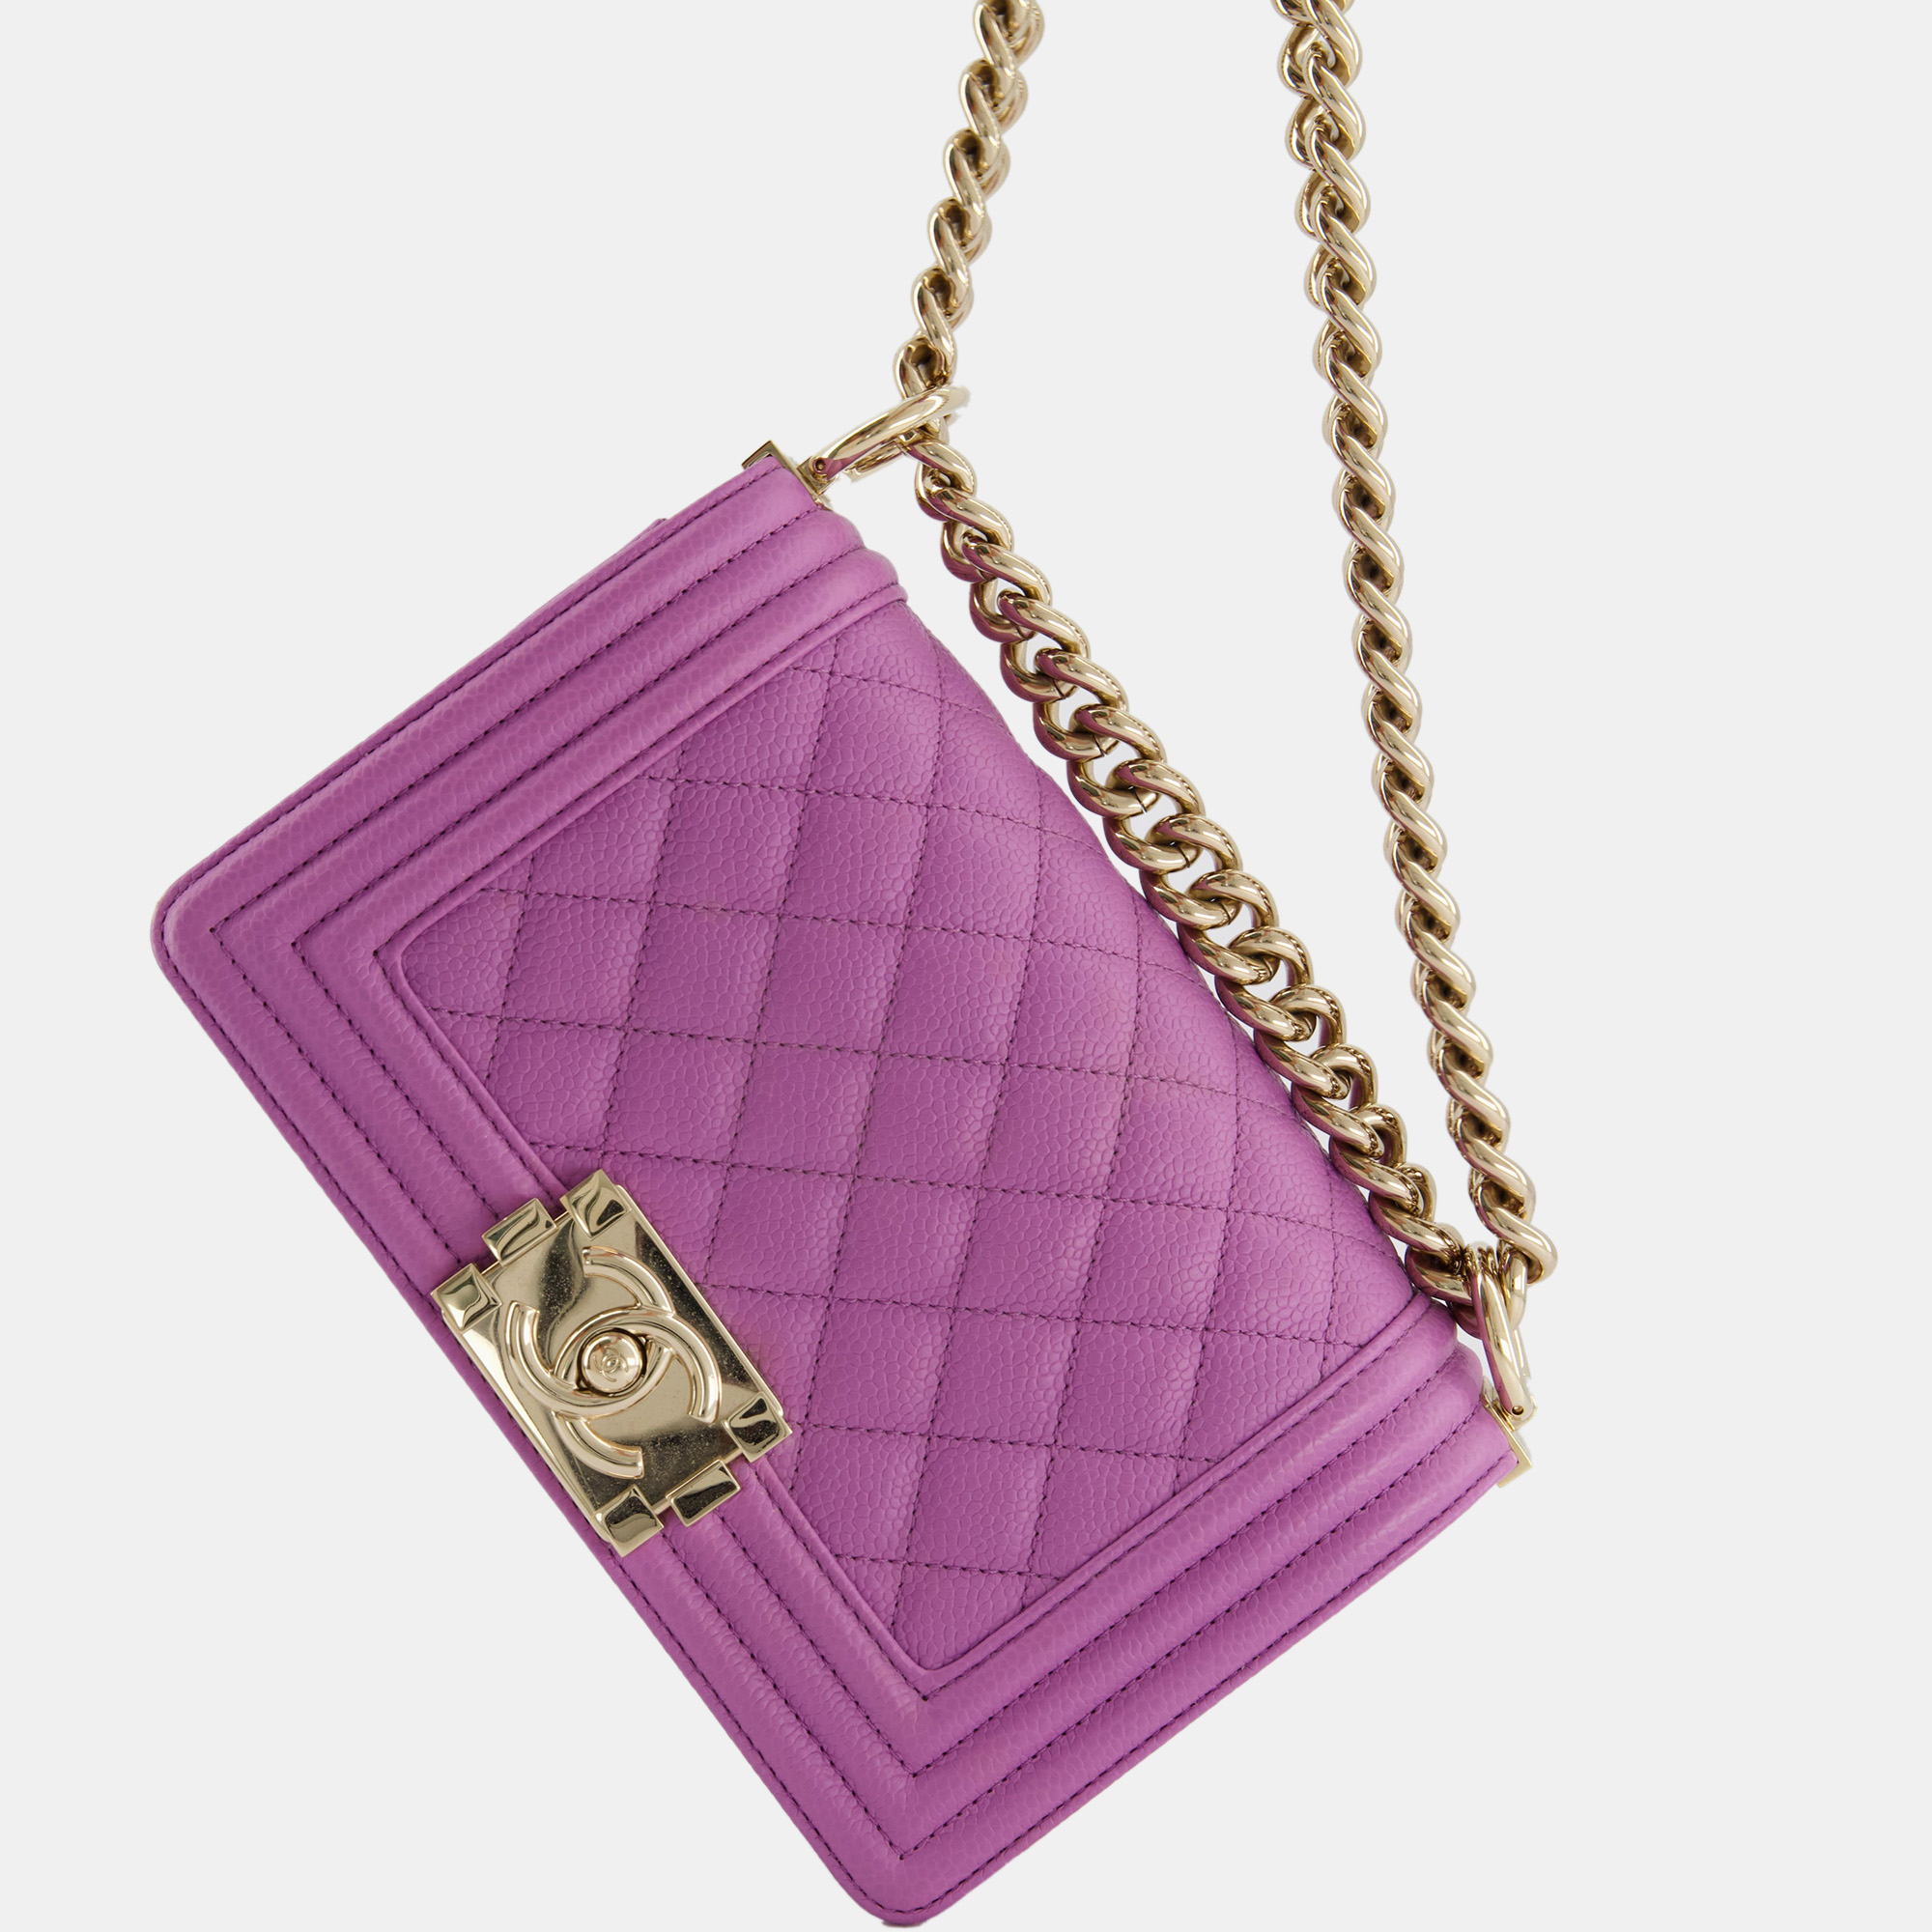 Chanel Purple Small Boy Bag In Lambskin Leather With Champagne Gold Hardware